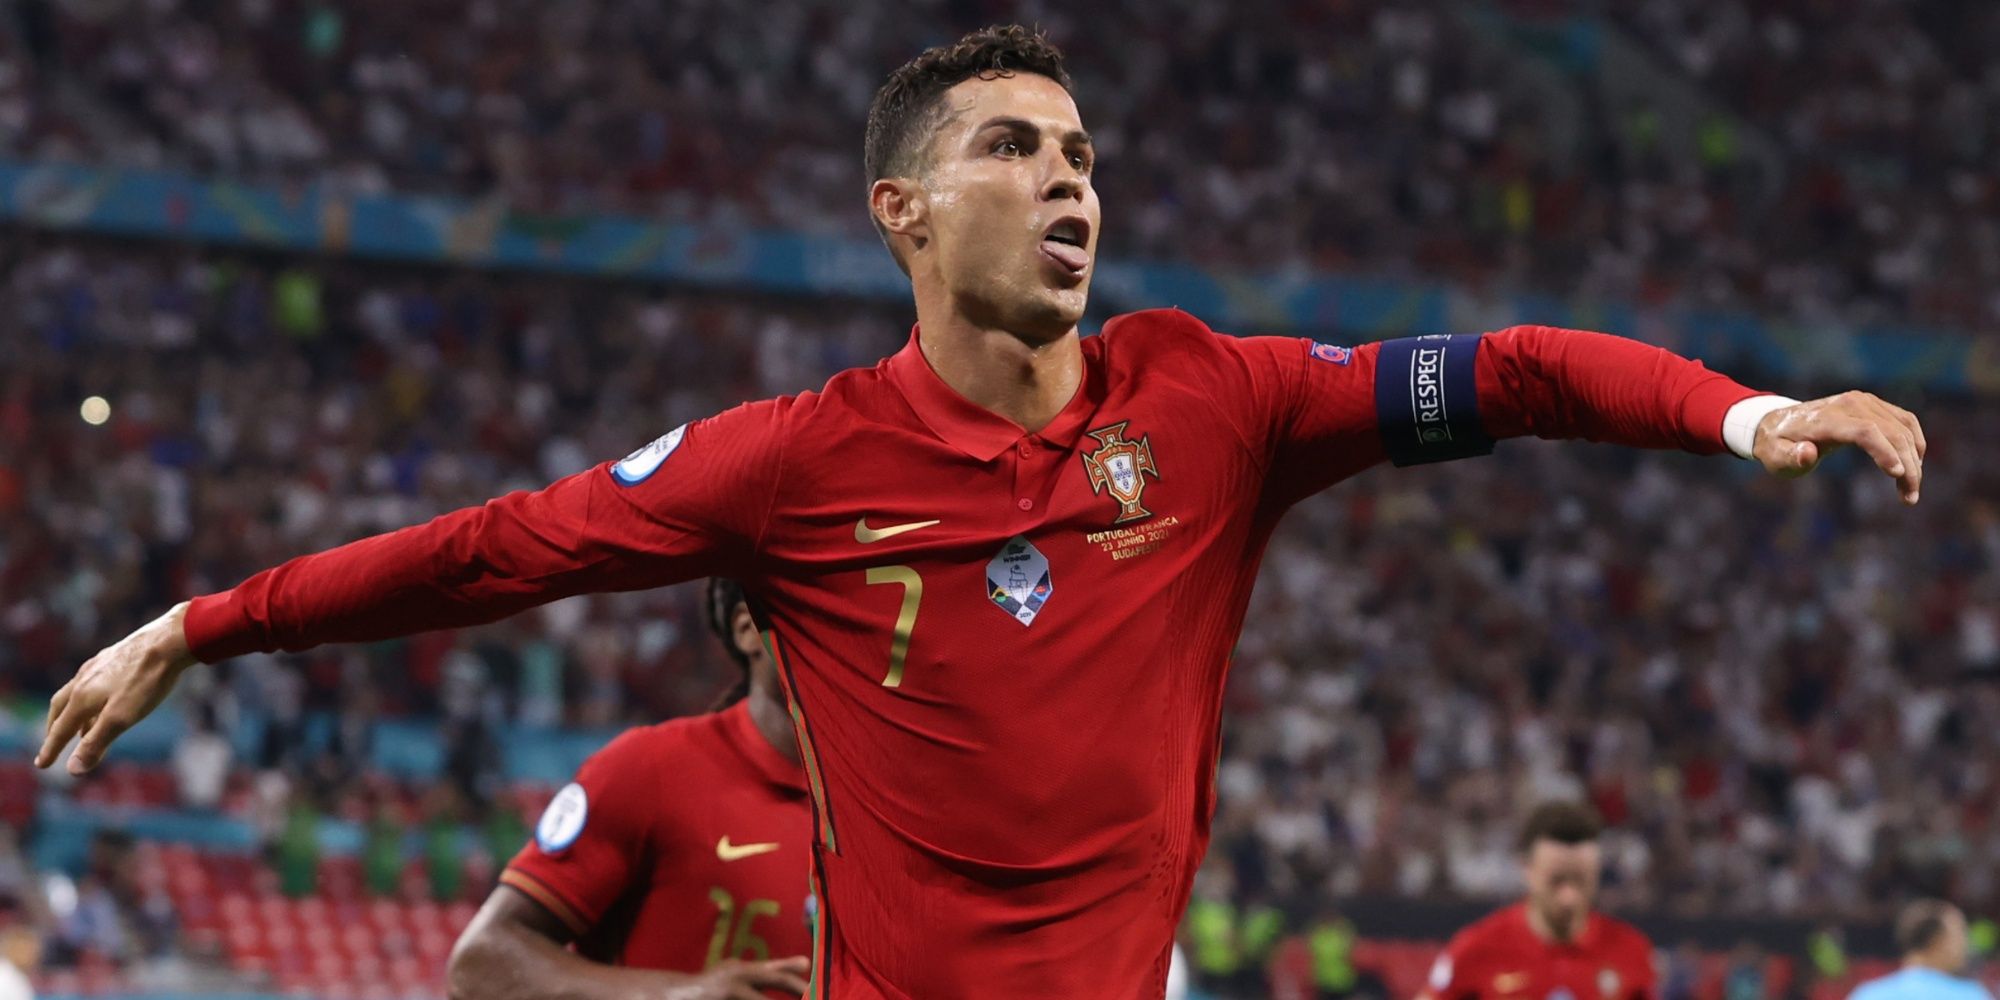 Cristiano Ronaldo, pictured here scoring for Portugal, scoring against the French team at Euro 2020.